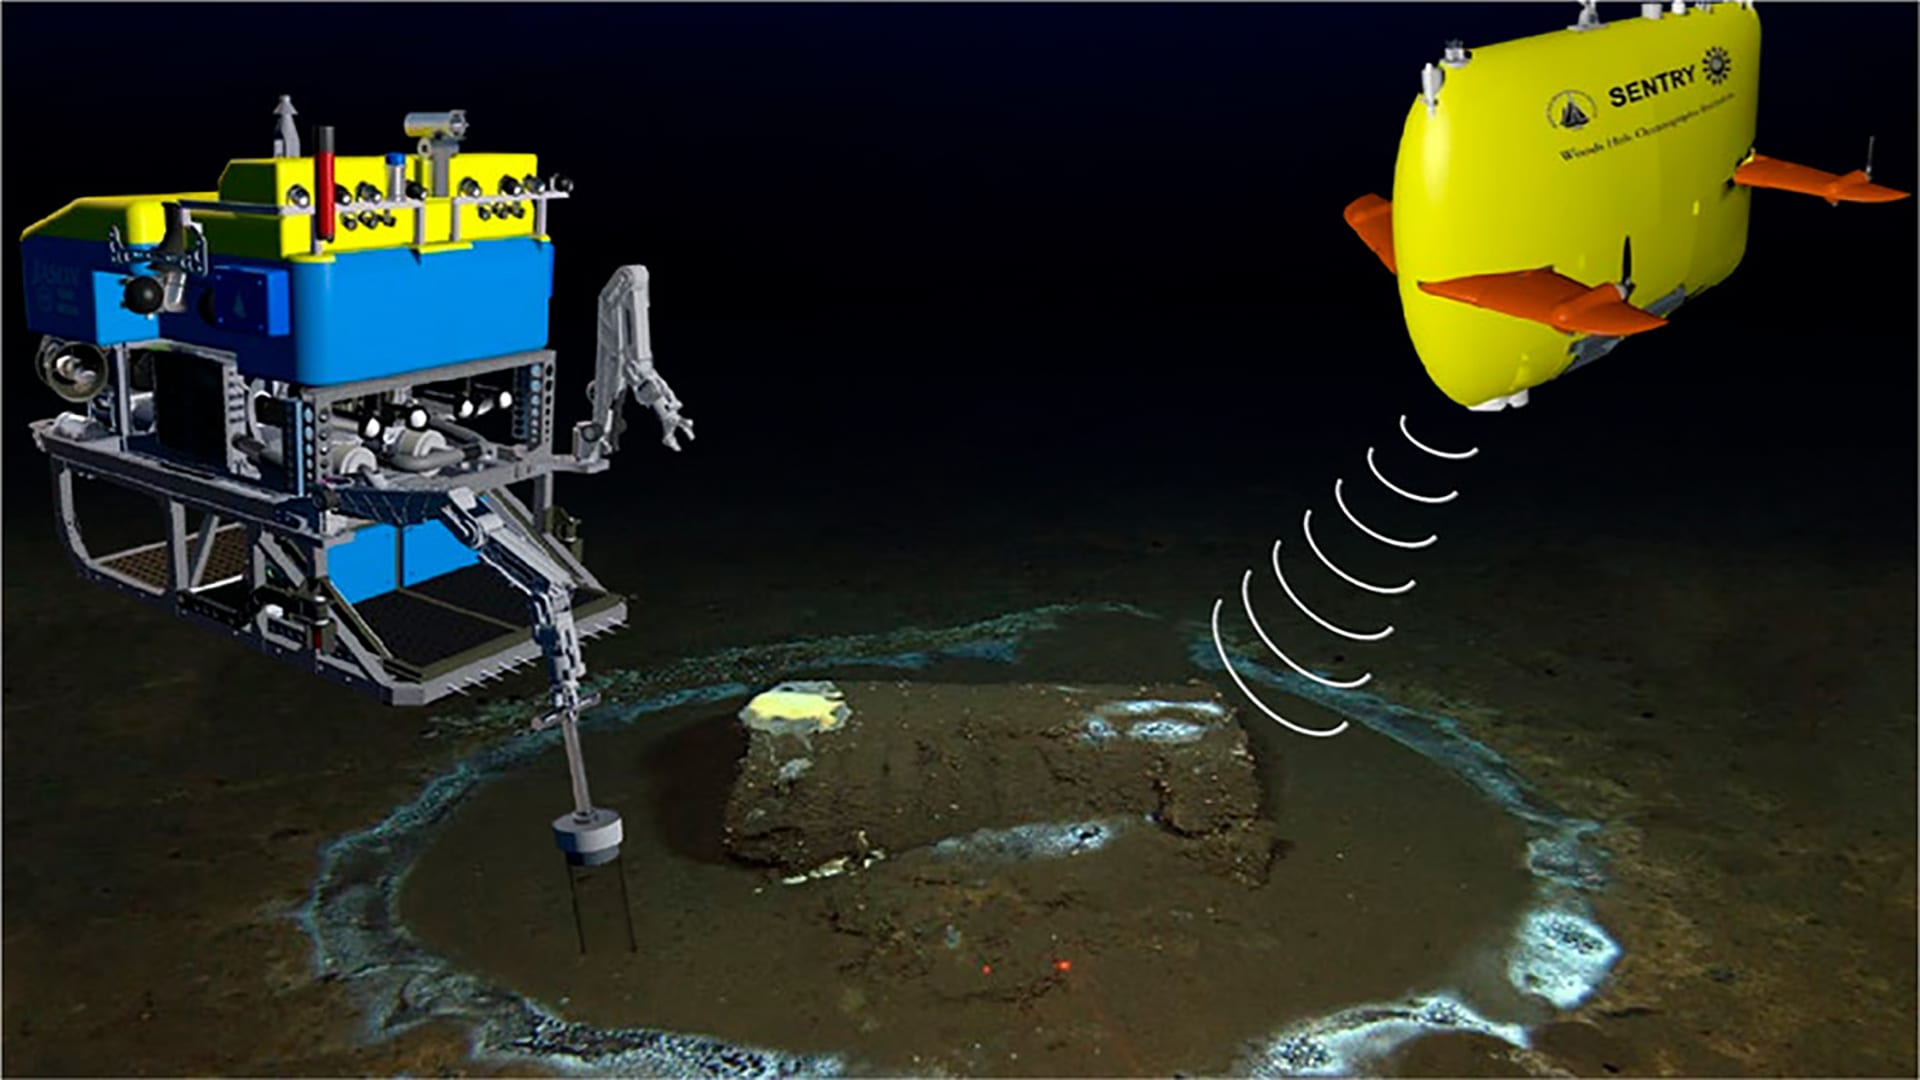 Sentry (upper right) and Jason worked together to study the dump site near Catalina Island, with the autonomous vehicle Sentry first mapping the seafloor to allow scientists and engineers to guide the remotely operated Jason to locations of interest for closer examination and to collect samples. Researchers noted sulfur microbes growing on top of and microbial rings on the seafloor surrounding many of the barrels. (Composite image from Kivenson et al., 2019, © Woods Hole Oceanographic Institution)